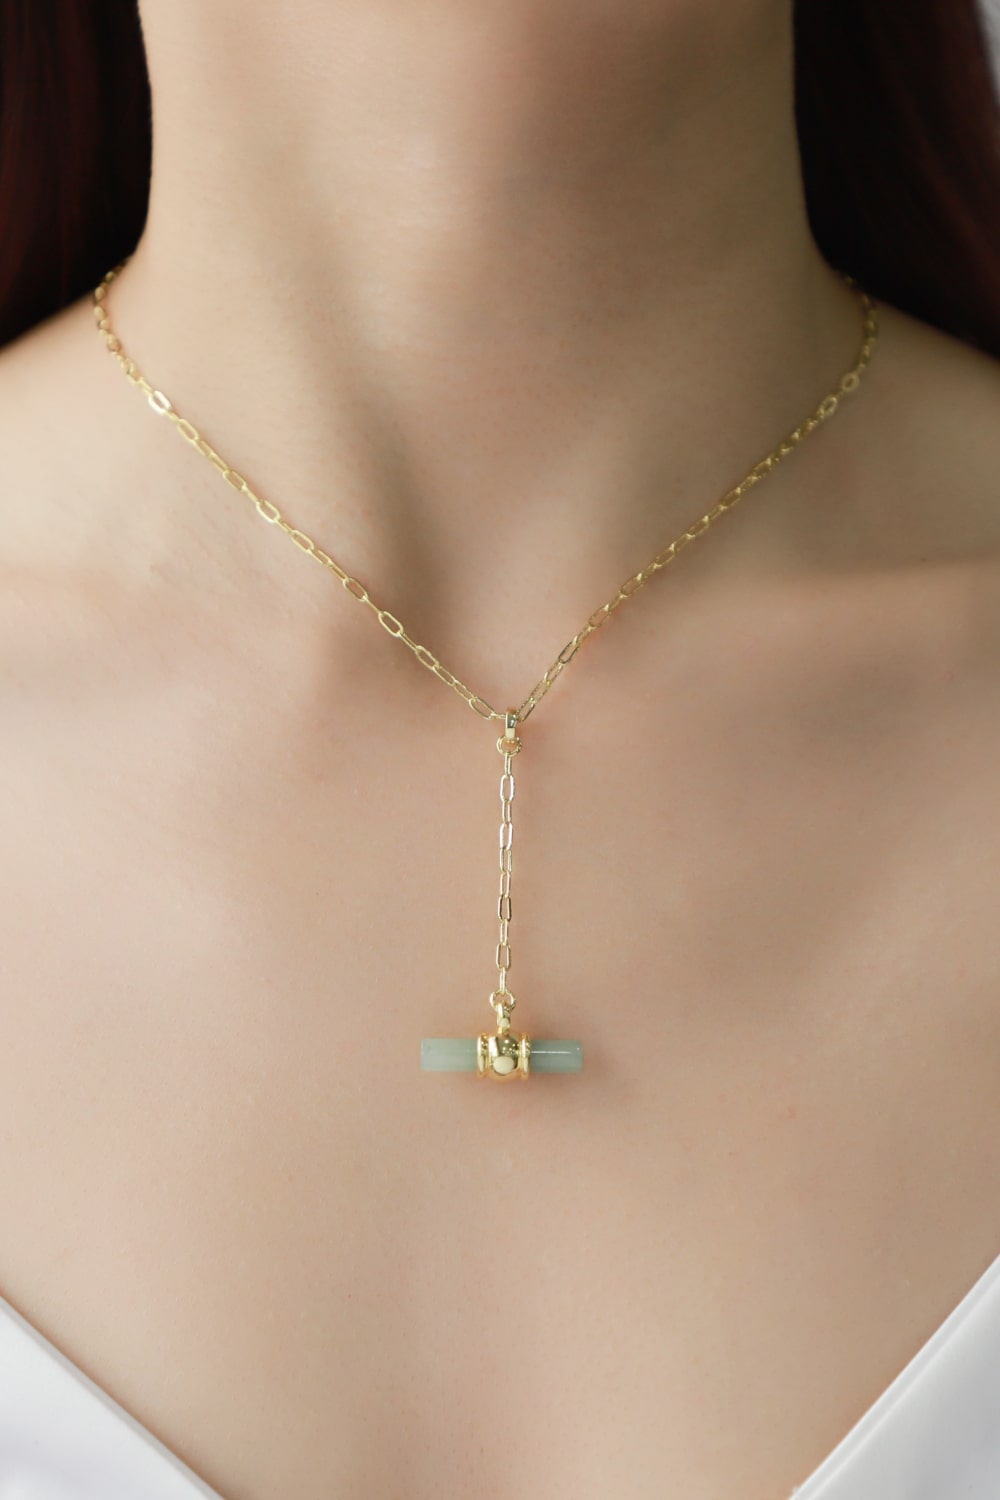 Gold-Plated Bar Pendant OT Chain Necklace - Necklaces - FITGGINS